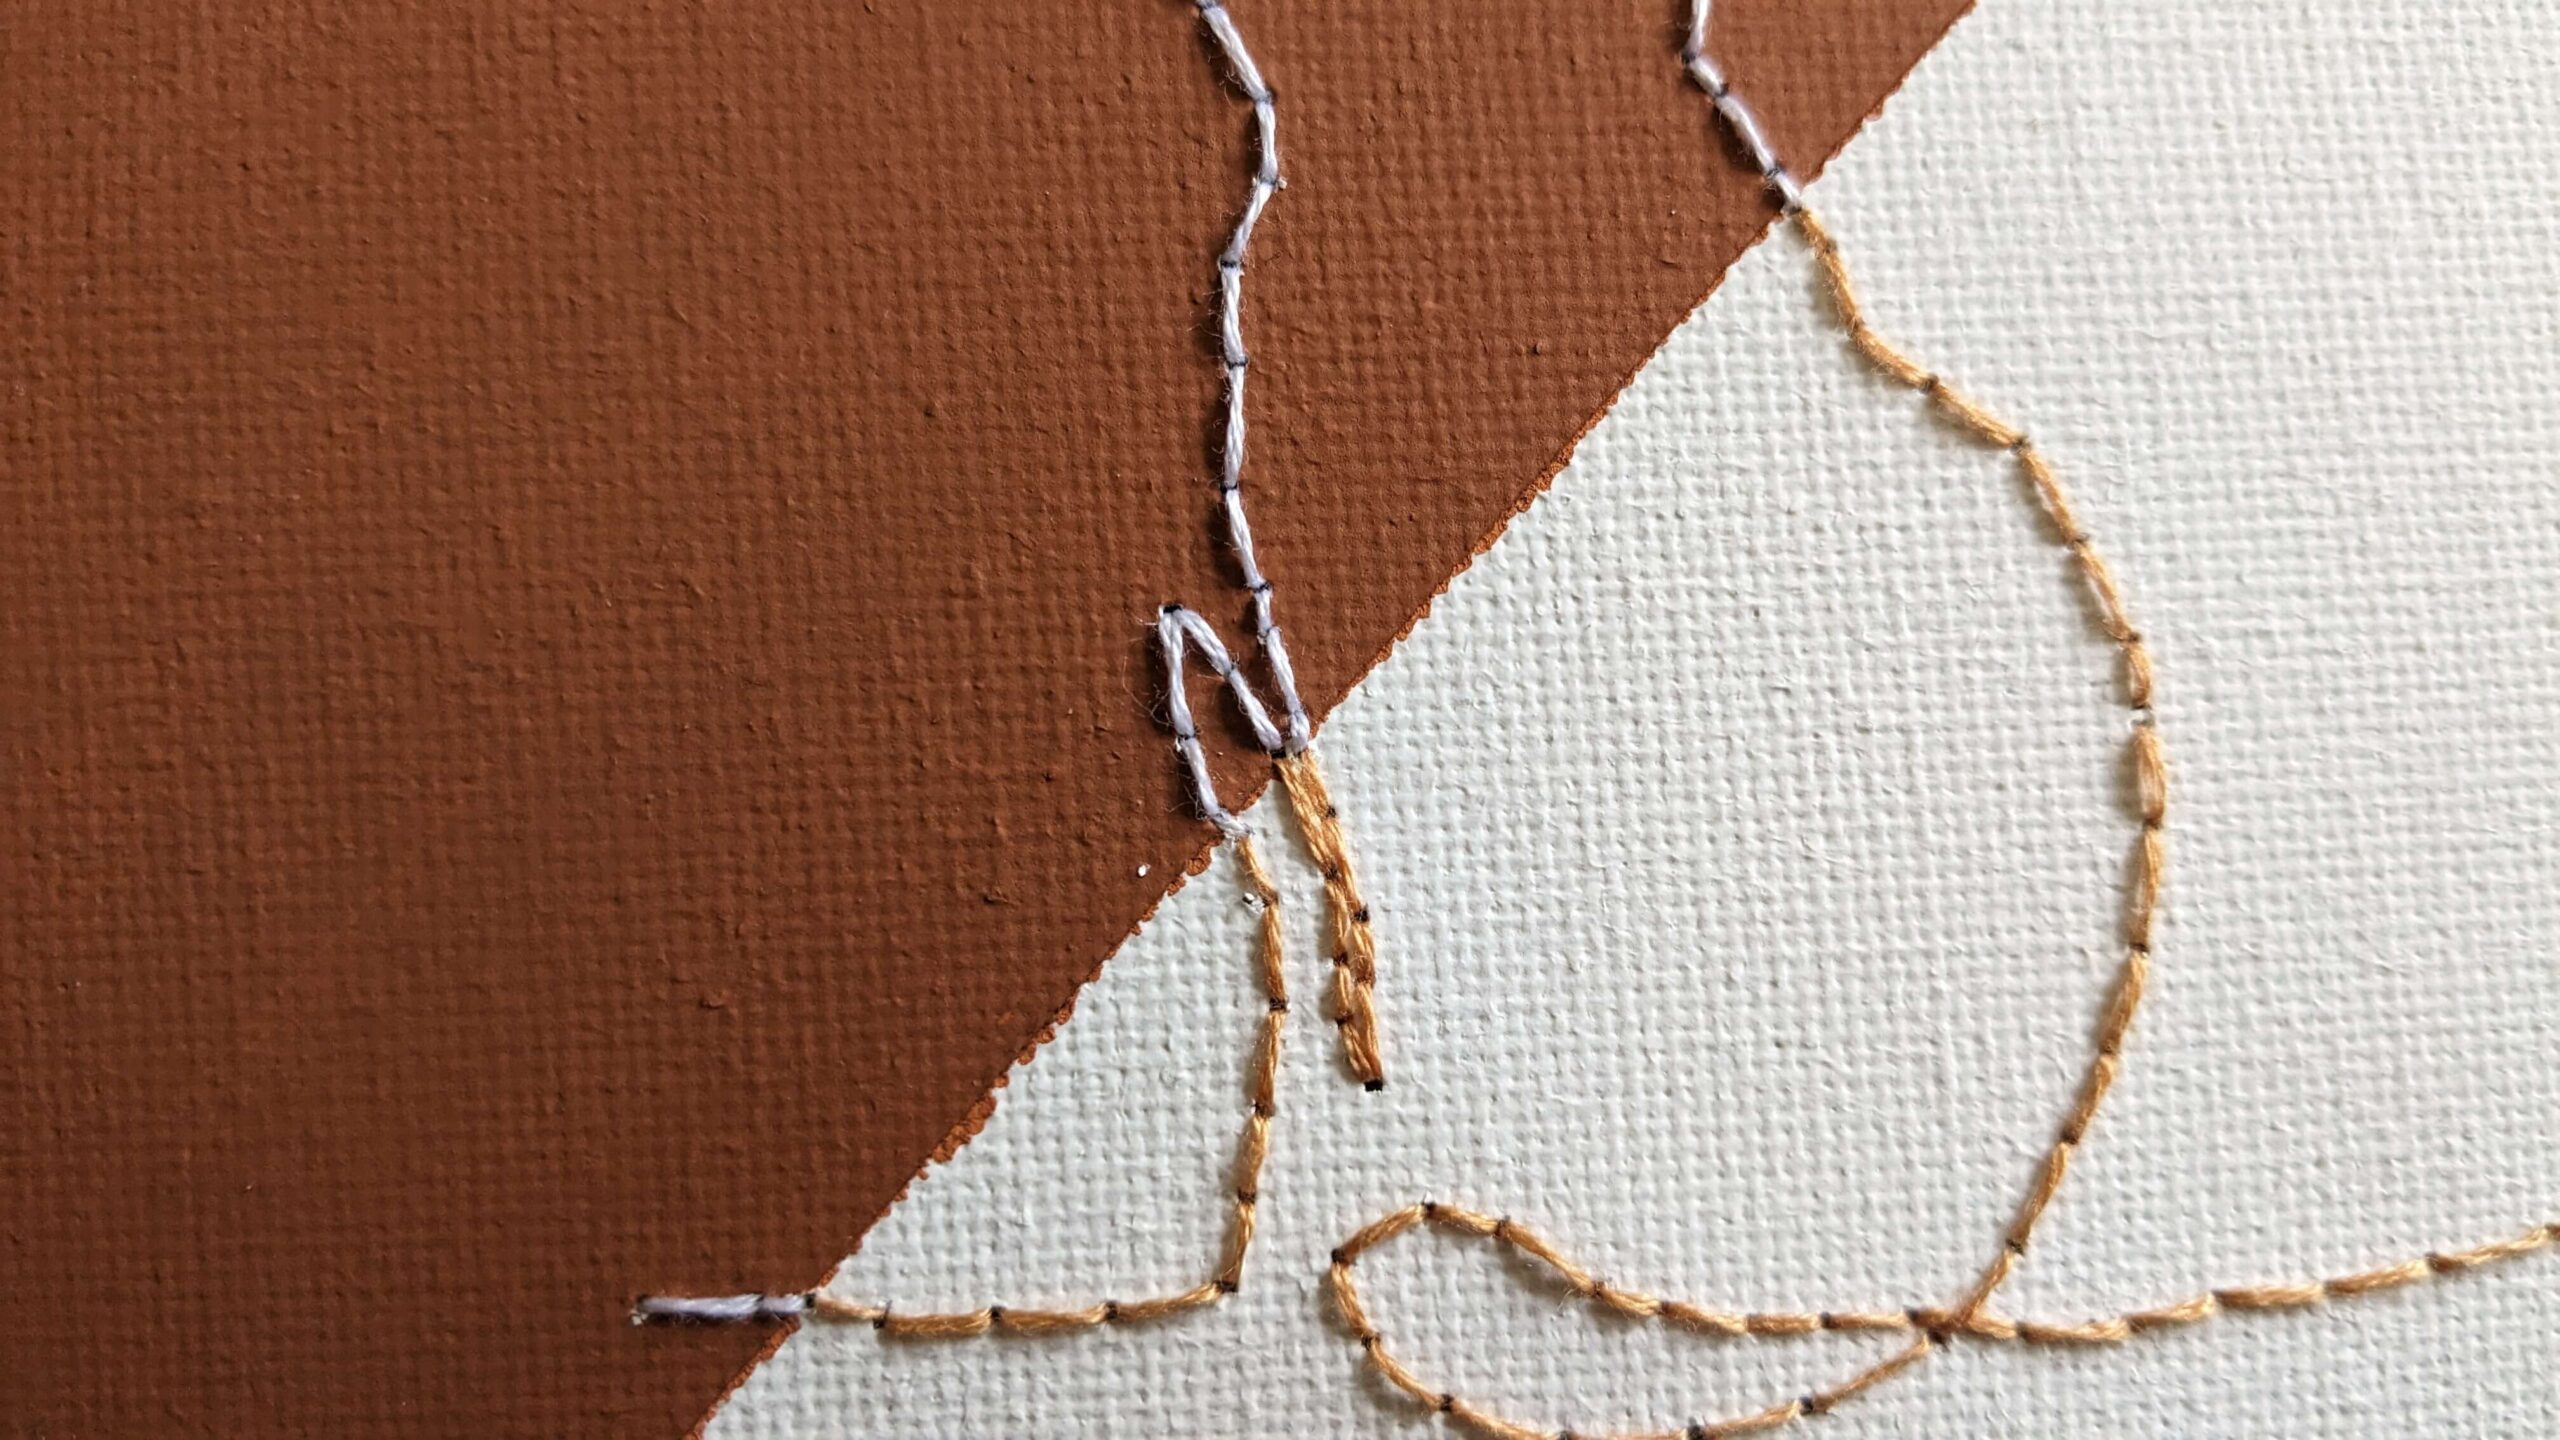 orange and white canvas with white and orange embroidery floss in the shape of a cat in a chain stitch